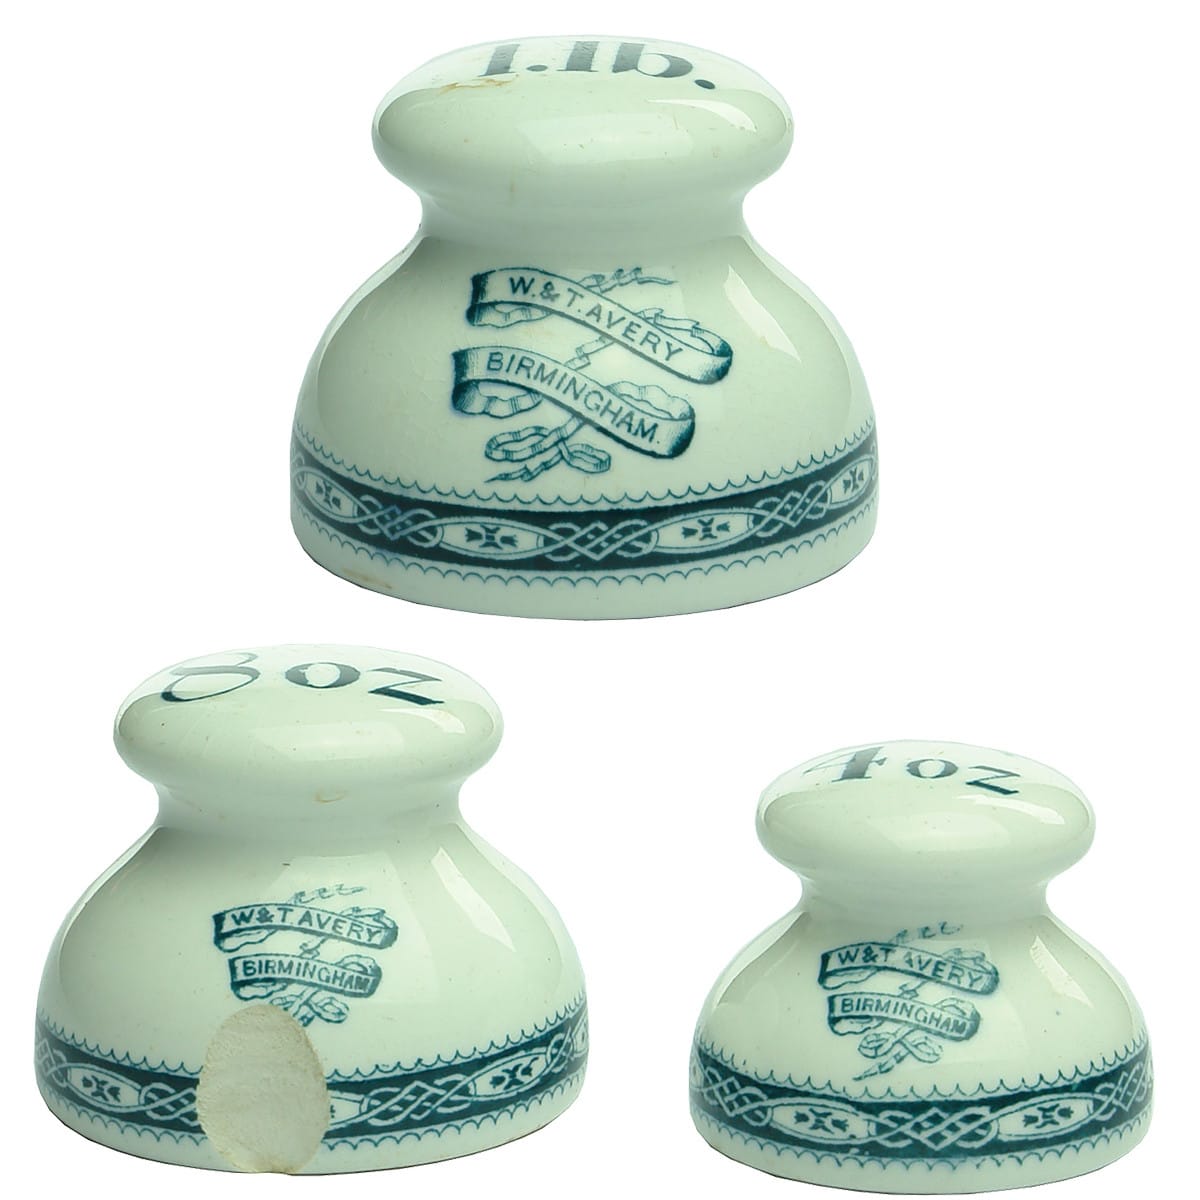 3 Ceramic weights with stamped lead inserts. W. & T. Avery, Birmingham. 1 lb, 8 oz & 4 oz. Green Print.